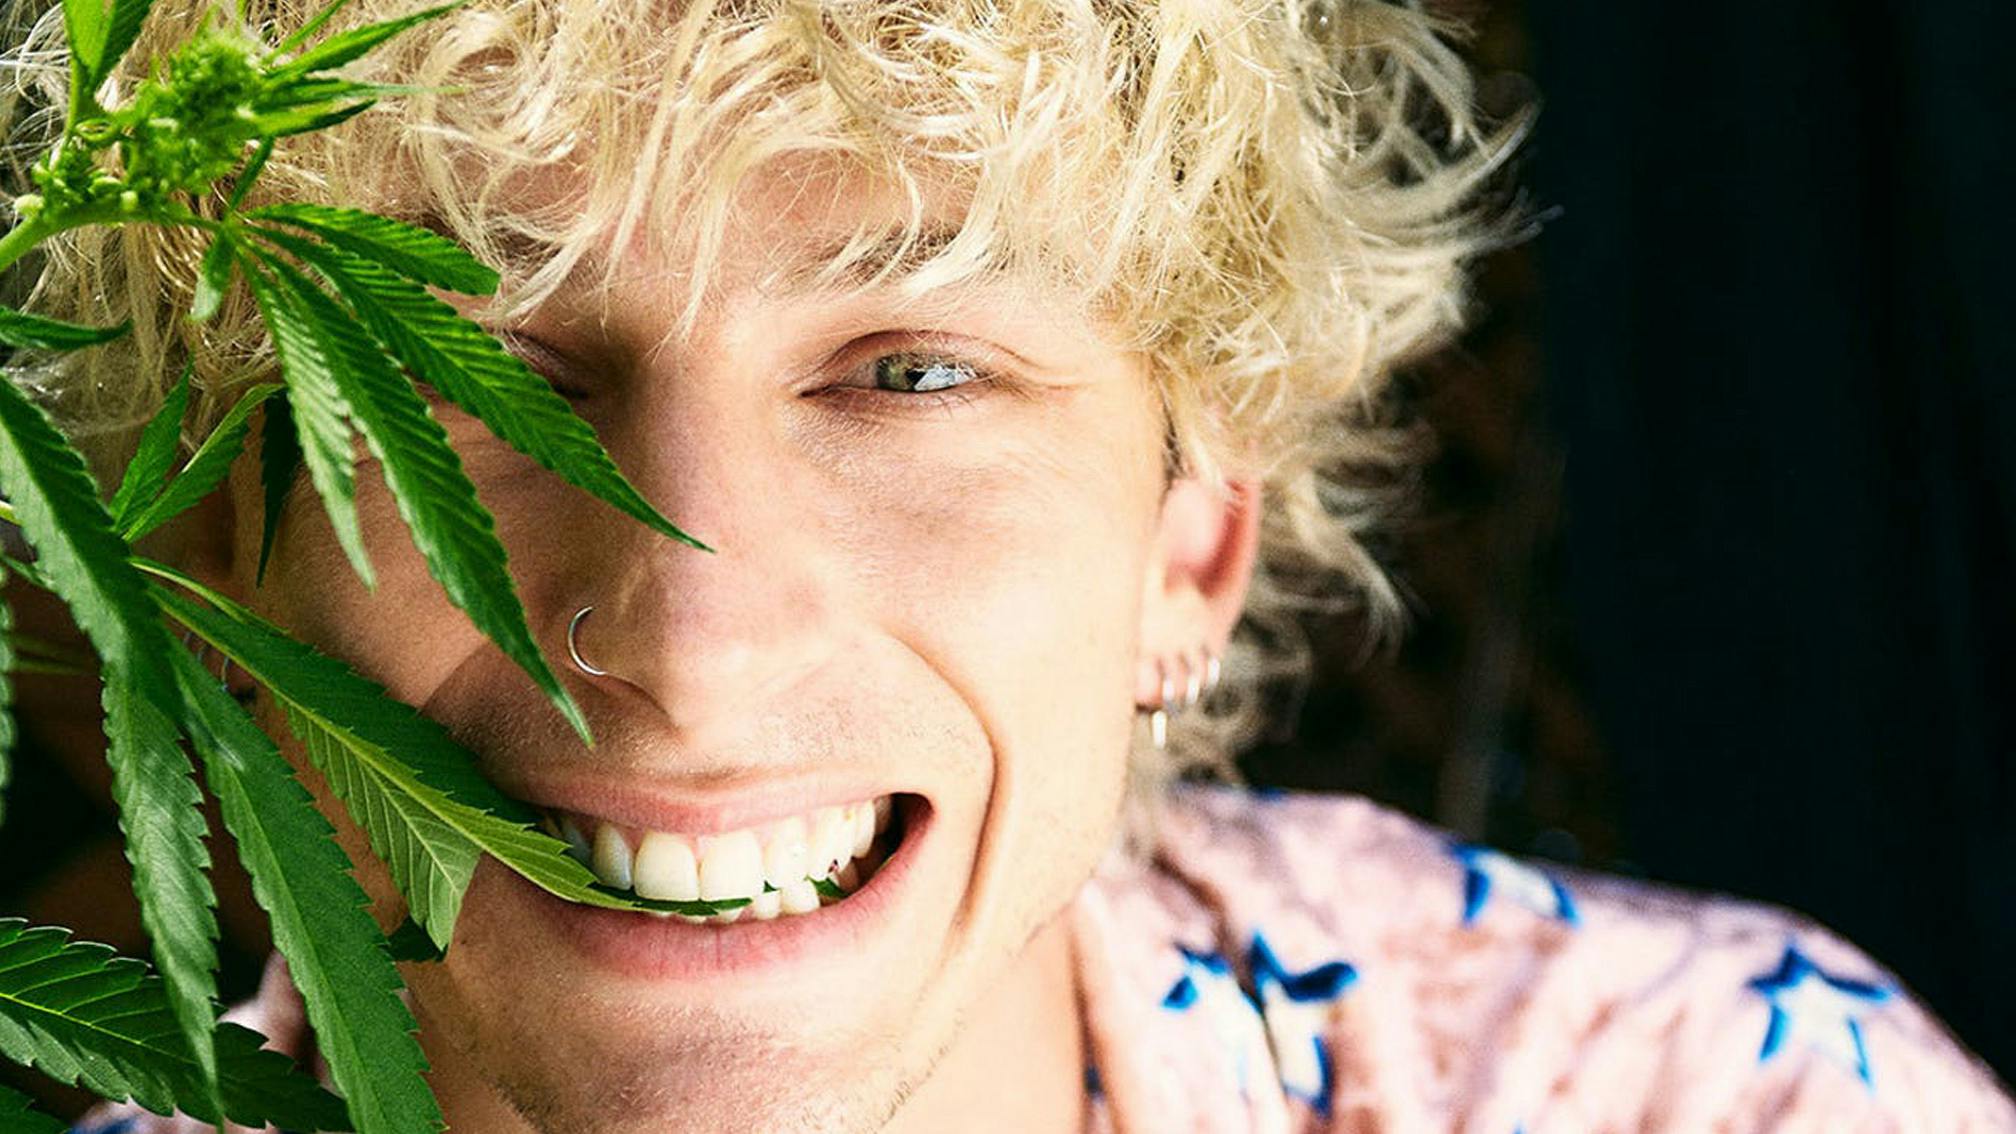 Here's Machine Gun Kelly's epic 32-song setlist from the first date of his U.S. tour